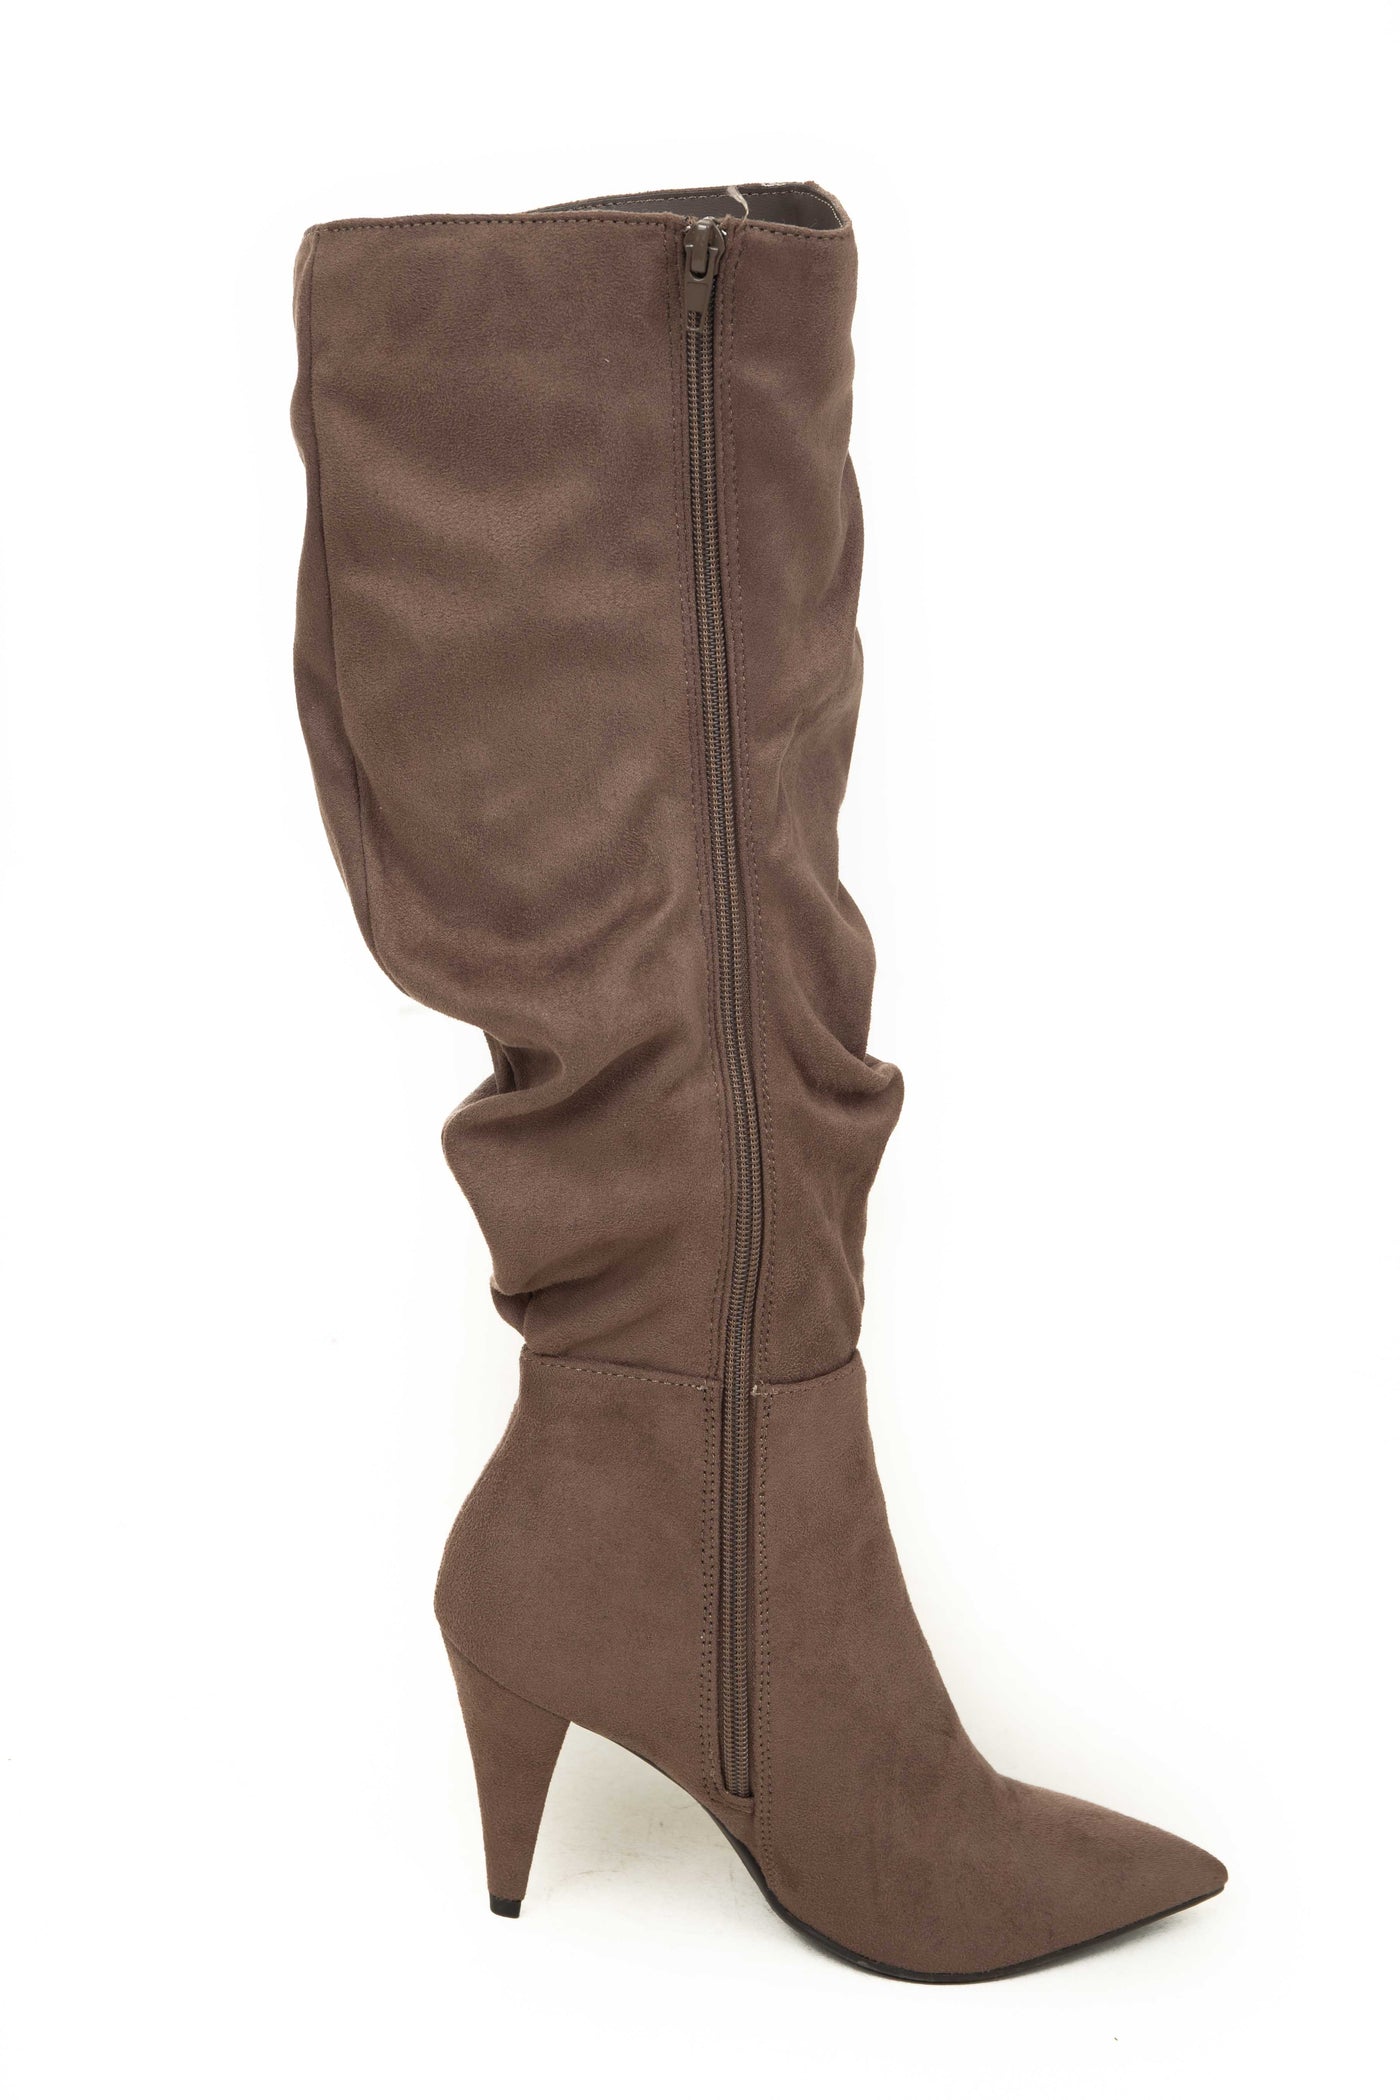 Coffee Slouchy Side Zip Up Pointed Heel Boots